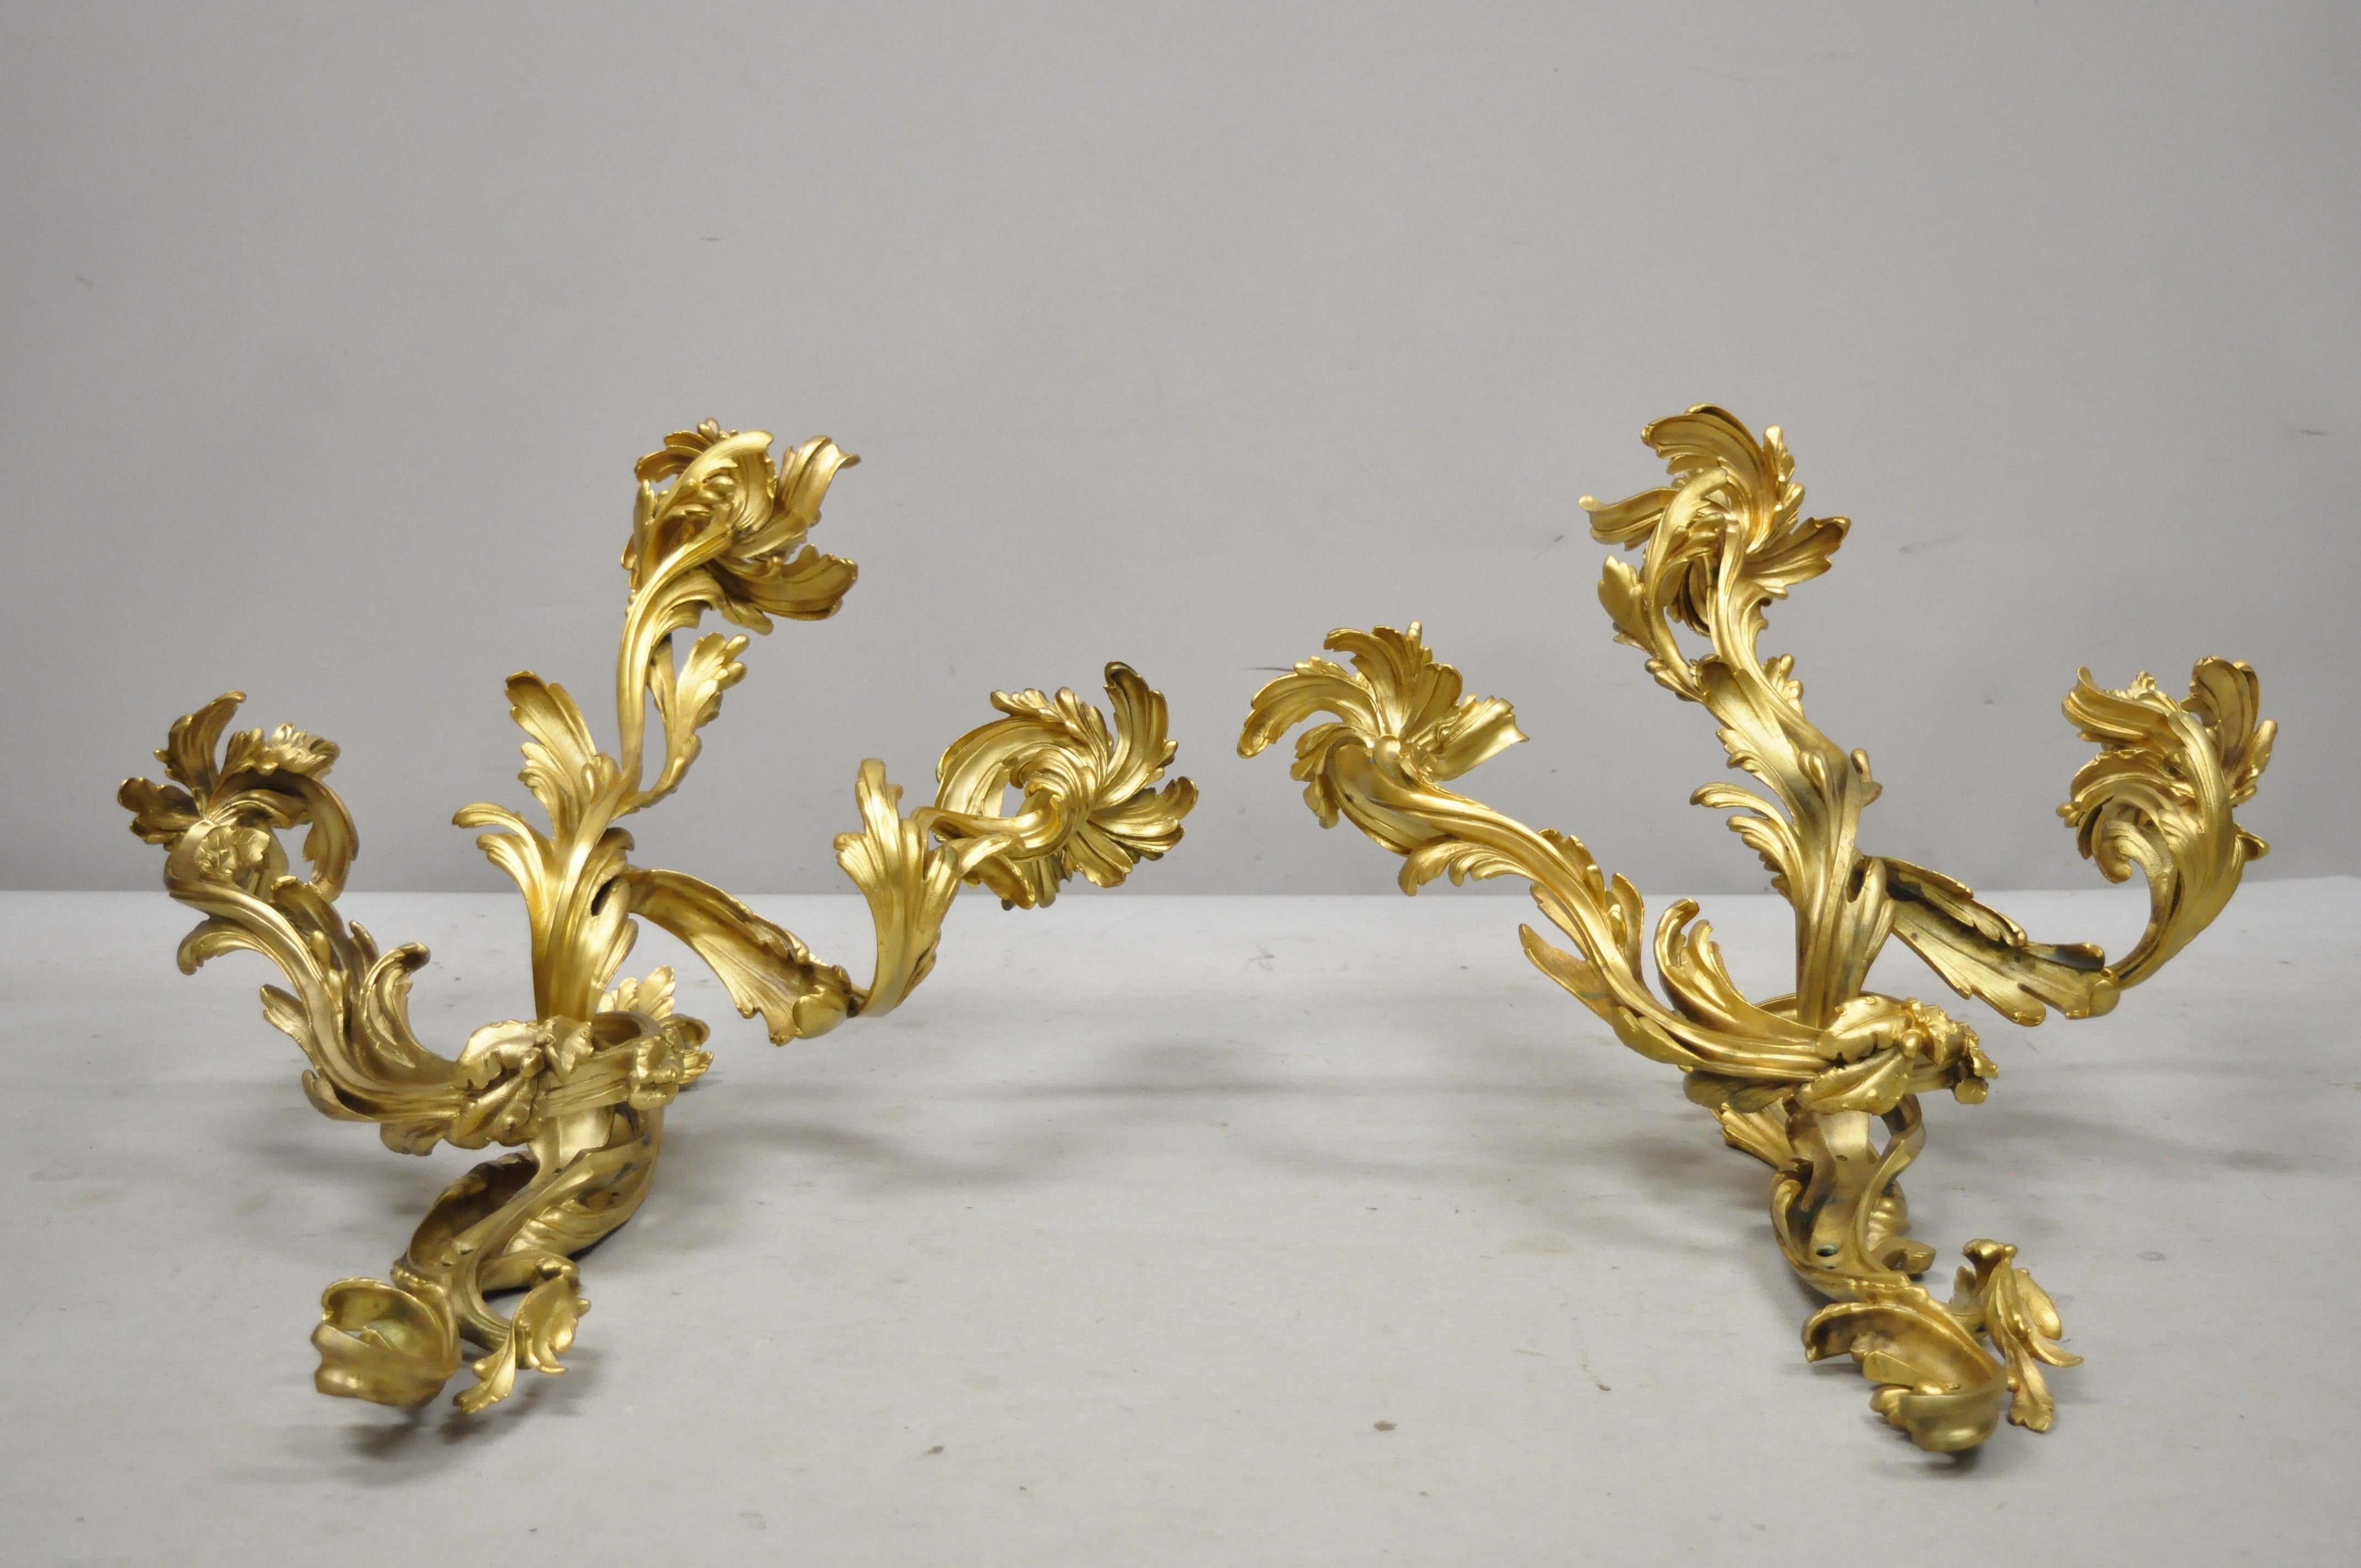 Large pair of antique French rococo gold gilt doré bronze candle wall sconces. Item includes large impressive bronze forms, attractive doré bronze gold gilt finish, 3 candle holders each, fancy acanthus scrollwork design, very nice antique pair,